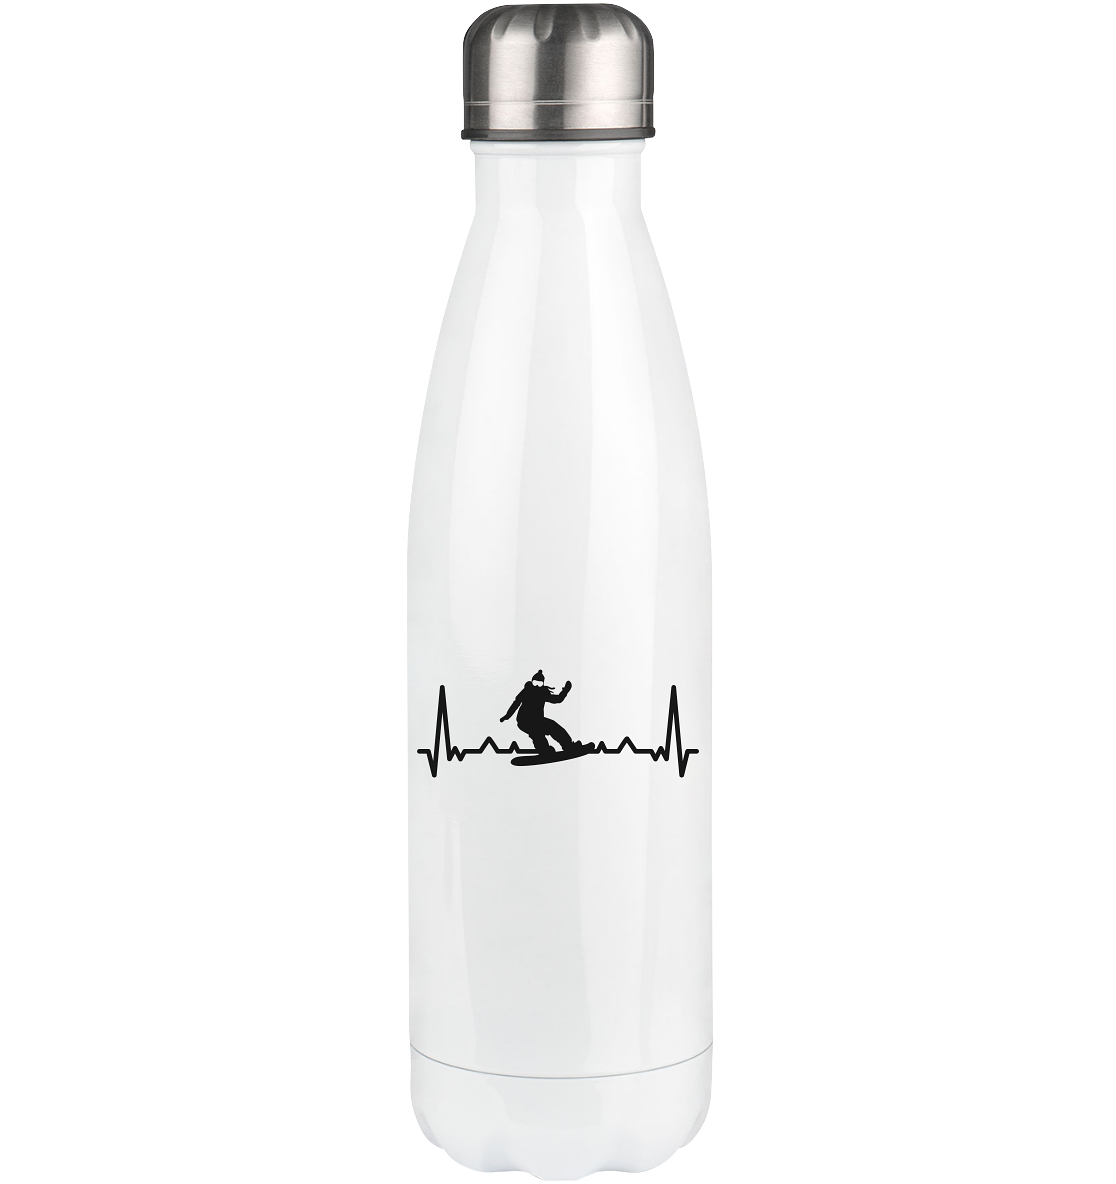 Heartbeat and Snowboarding - Edelstahl Thermosflasche snowboarden 500ml